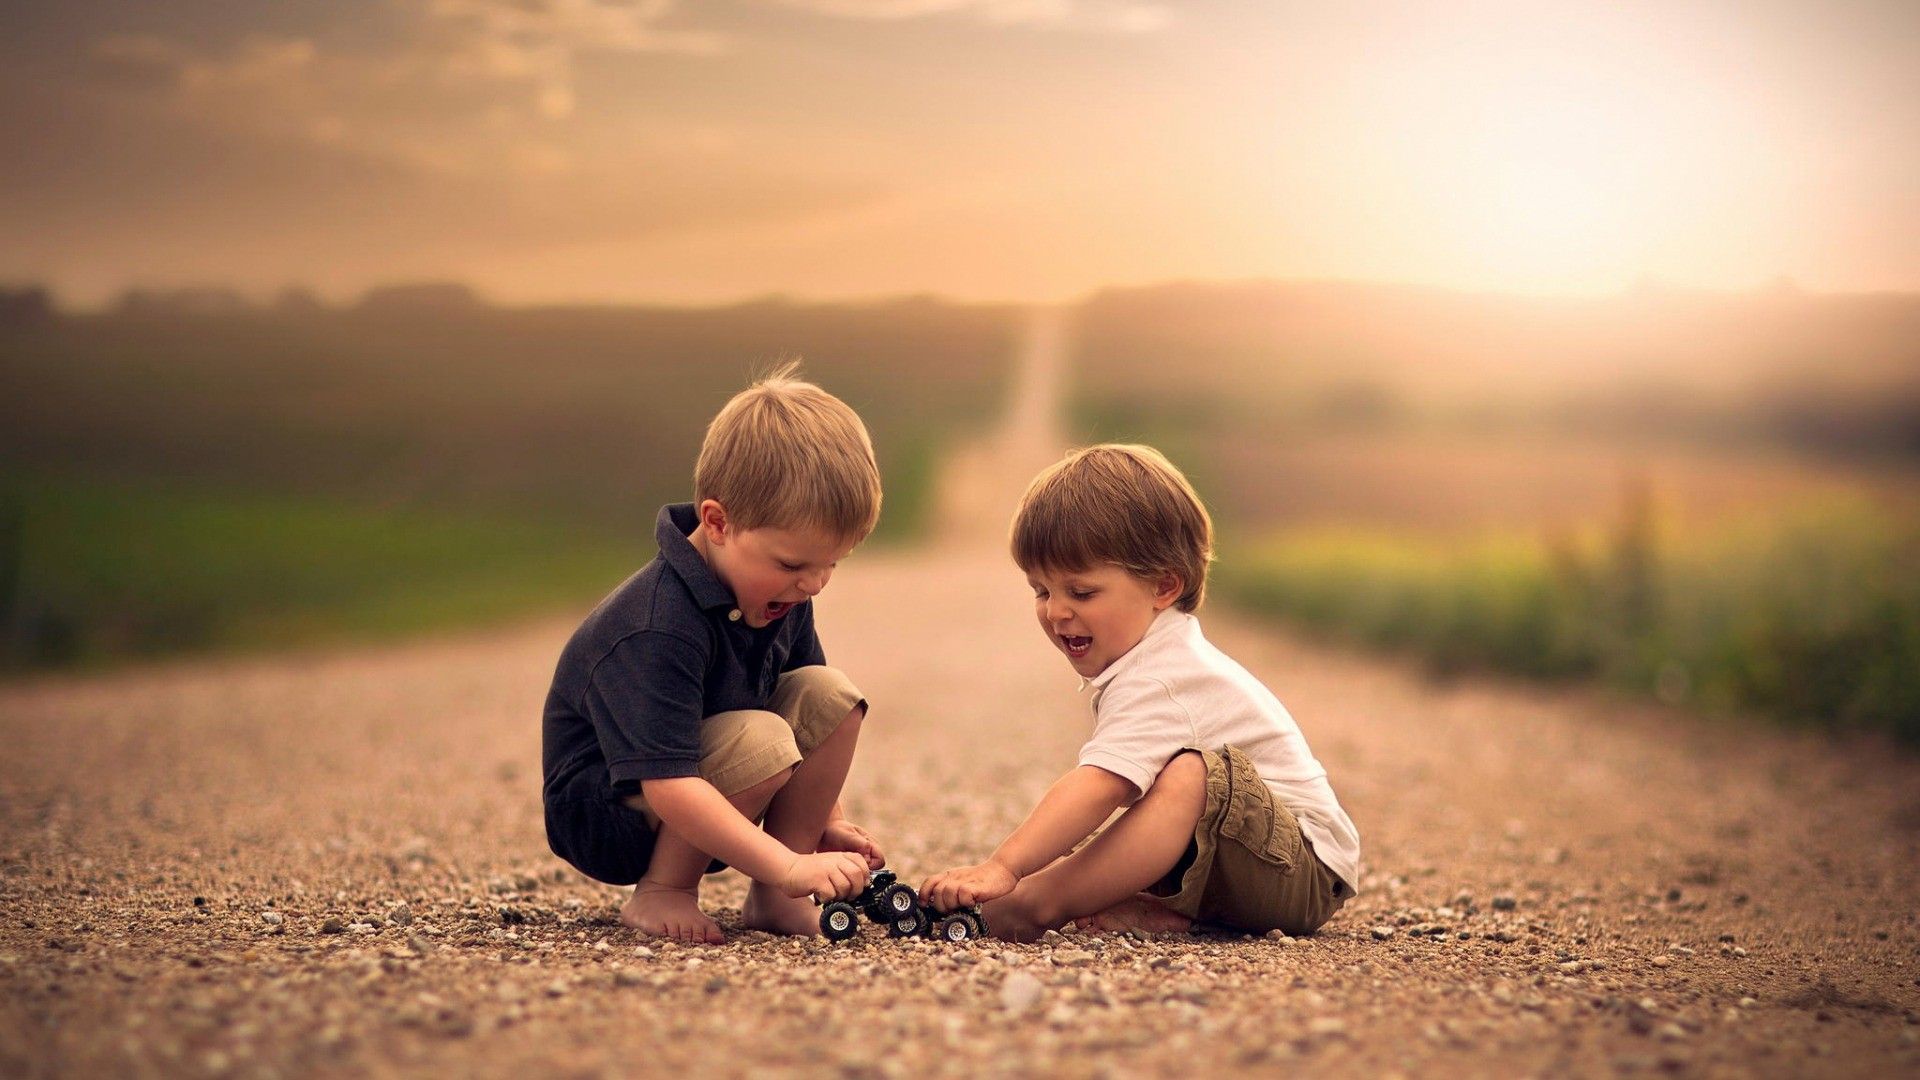 Wallpaper, sunlight, people, toys, depth of field, children, love, road, morning, Nebraska, Person, playing, family, romance, Jake Olson, child, man, photograph, male, 1920x1080 px, portrait photography, interaction, ceremony 1920x1080